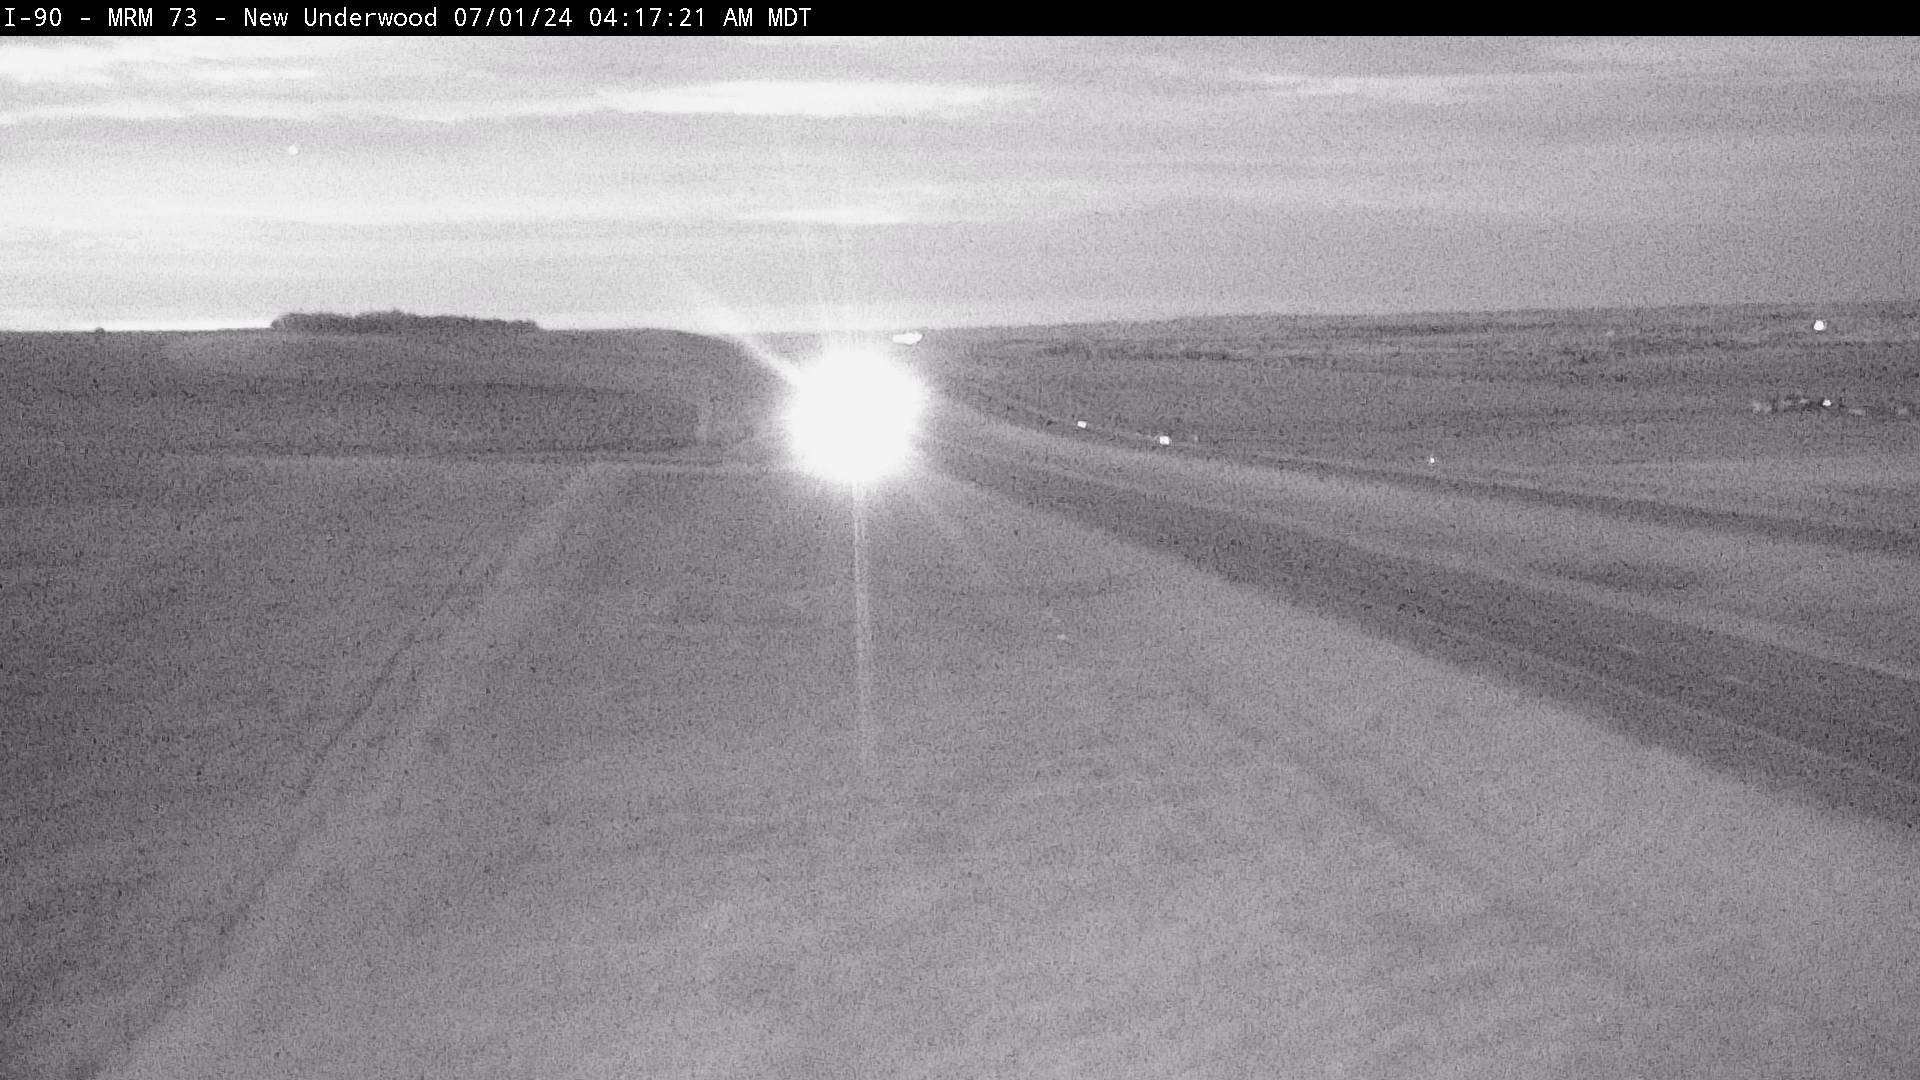 Traffic Cam 5 miles west of town along I-90 @ MP 73 - East Player